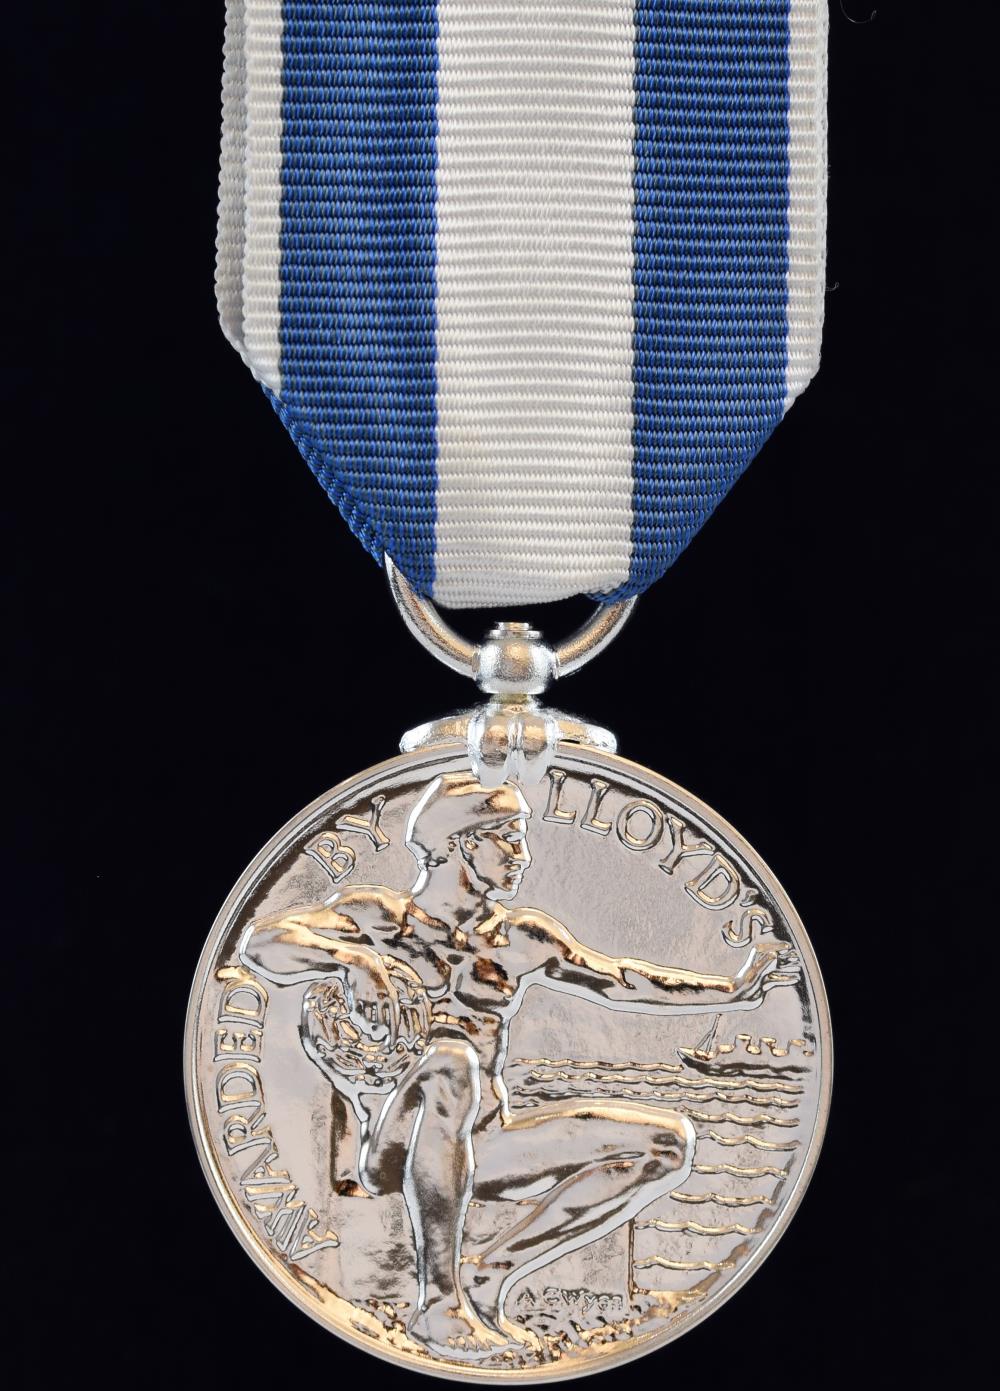 Worcestershire Medal Service: Lloyds War Medal For Bravery at Sea